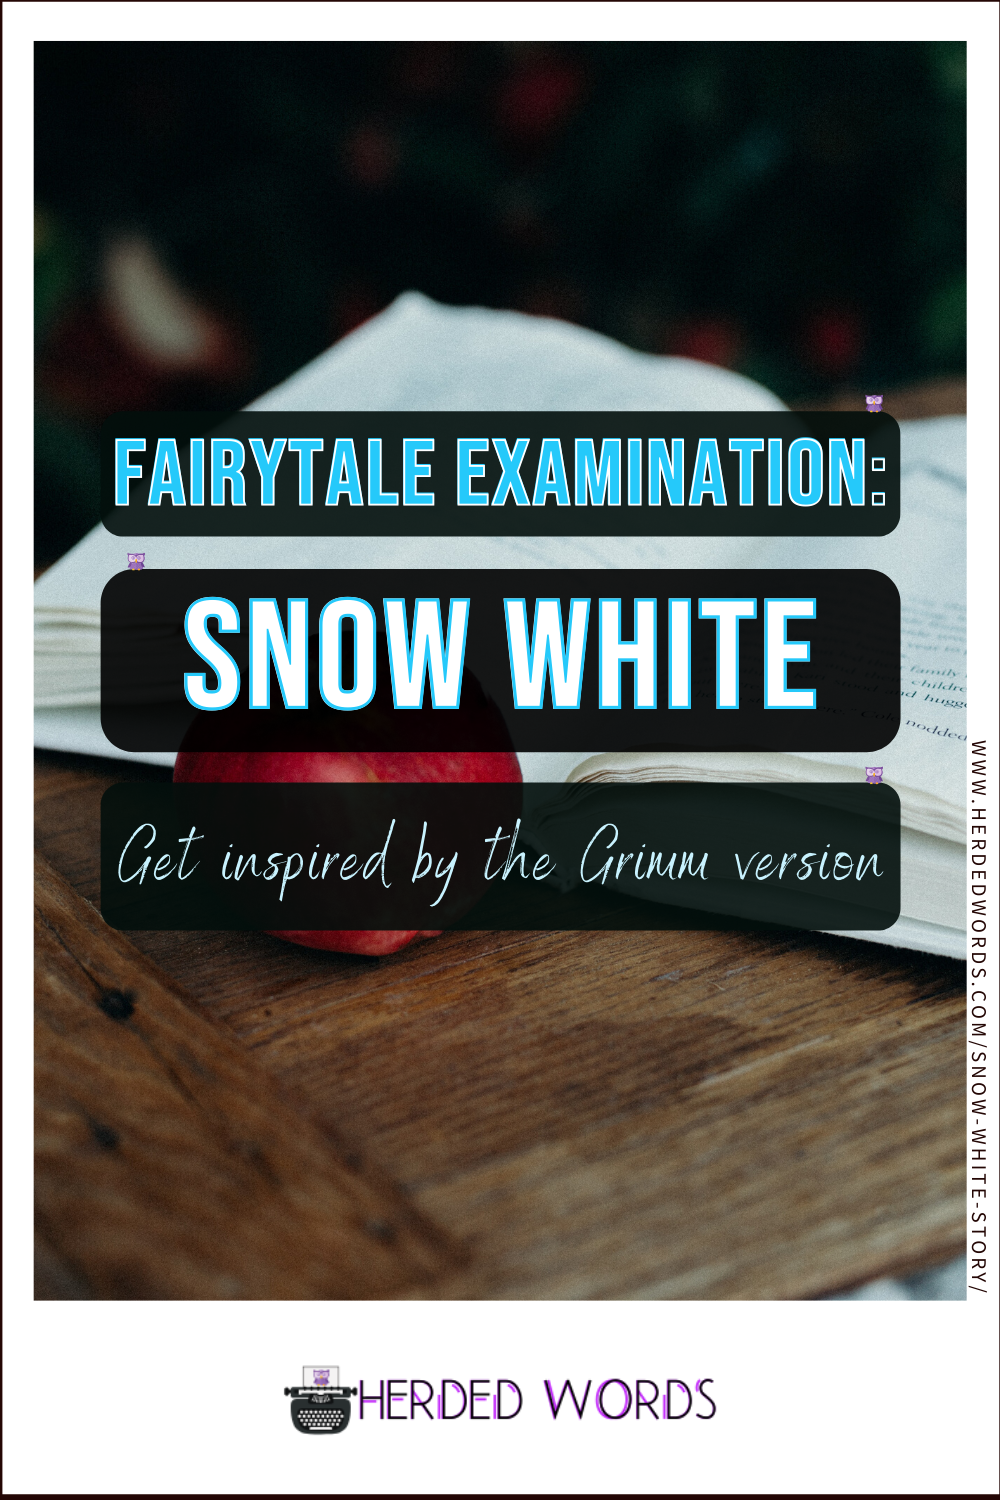 Image Link to Fairytale Examination of SNOW WHITE (get inspired by the Grimm version)